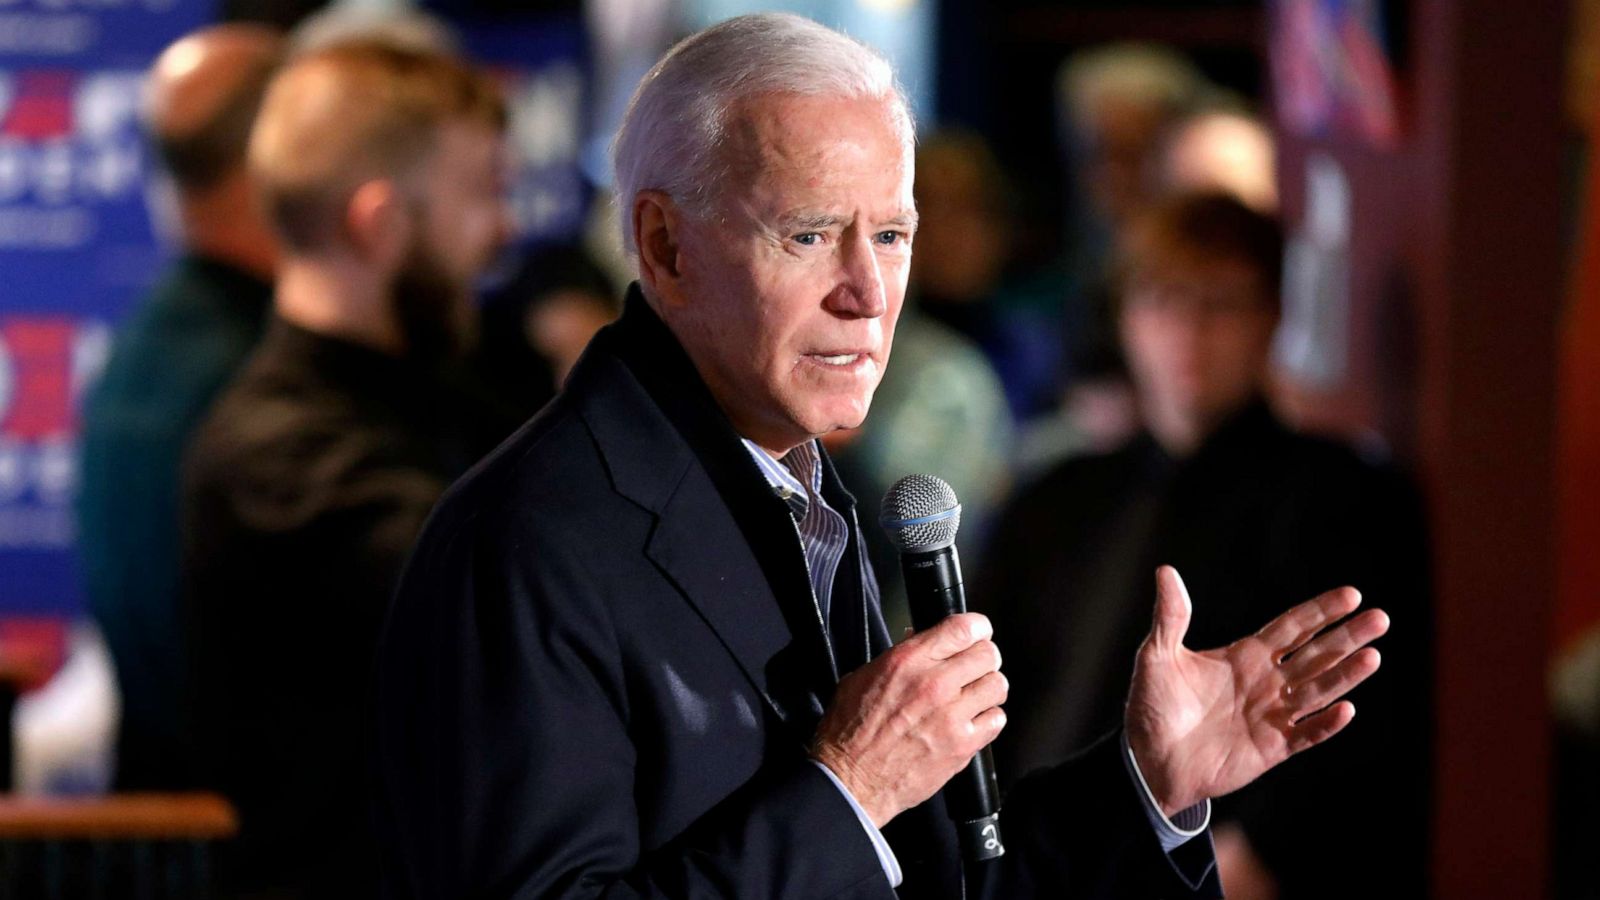 At union town hall, Joe Biden public education plan to raise teacher pay and invest in - ABC